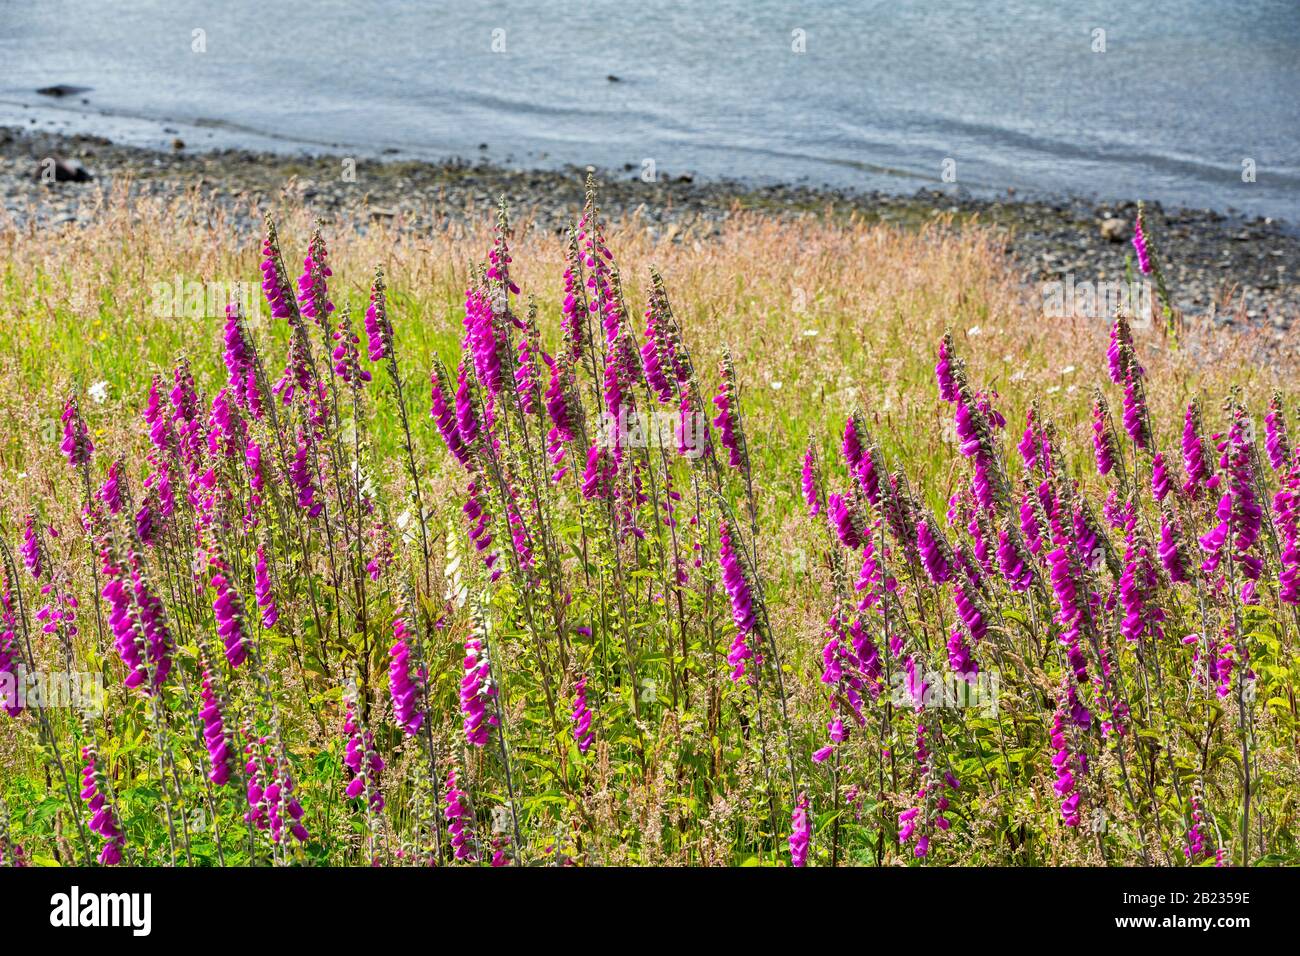 Foxgloves a none native plant to Chile growing near Seno Obstruccion with solar panels, Patagonia, Chile. Stock Photo